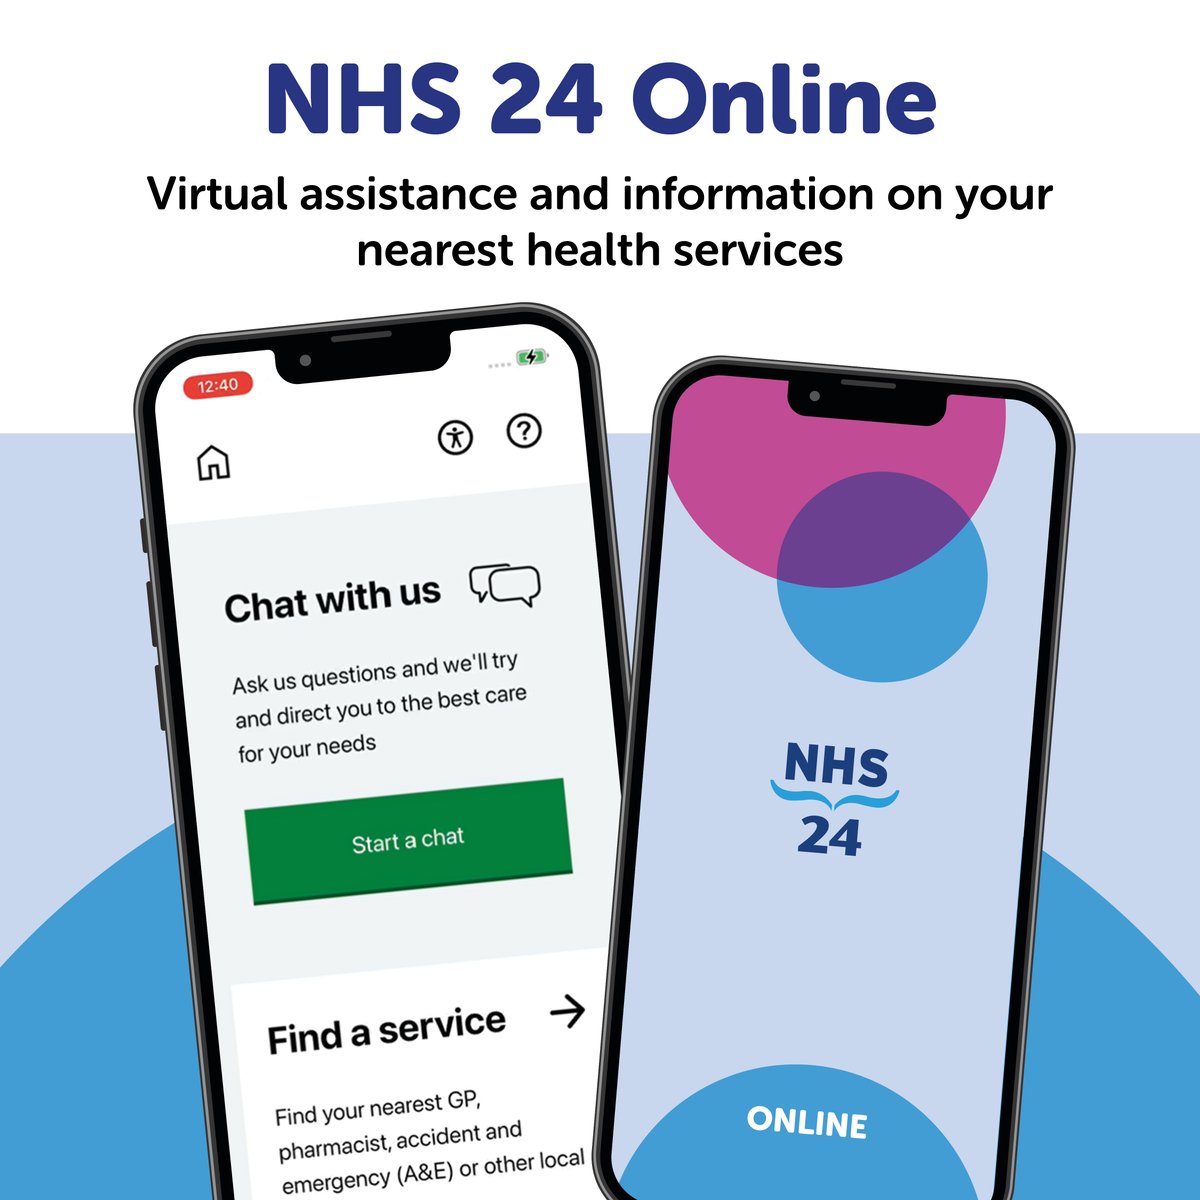 Feeling unwell? You can now find out more about your symptoms and what to do if your condition worsens via a new, easy-to-use mobile app from NHS 24. It's free to download on the Google Play Store for Android & the Apple App Store 👍